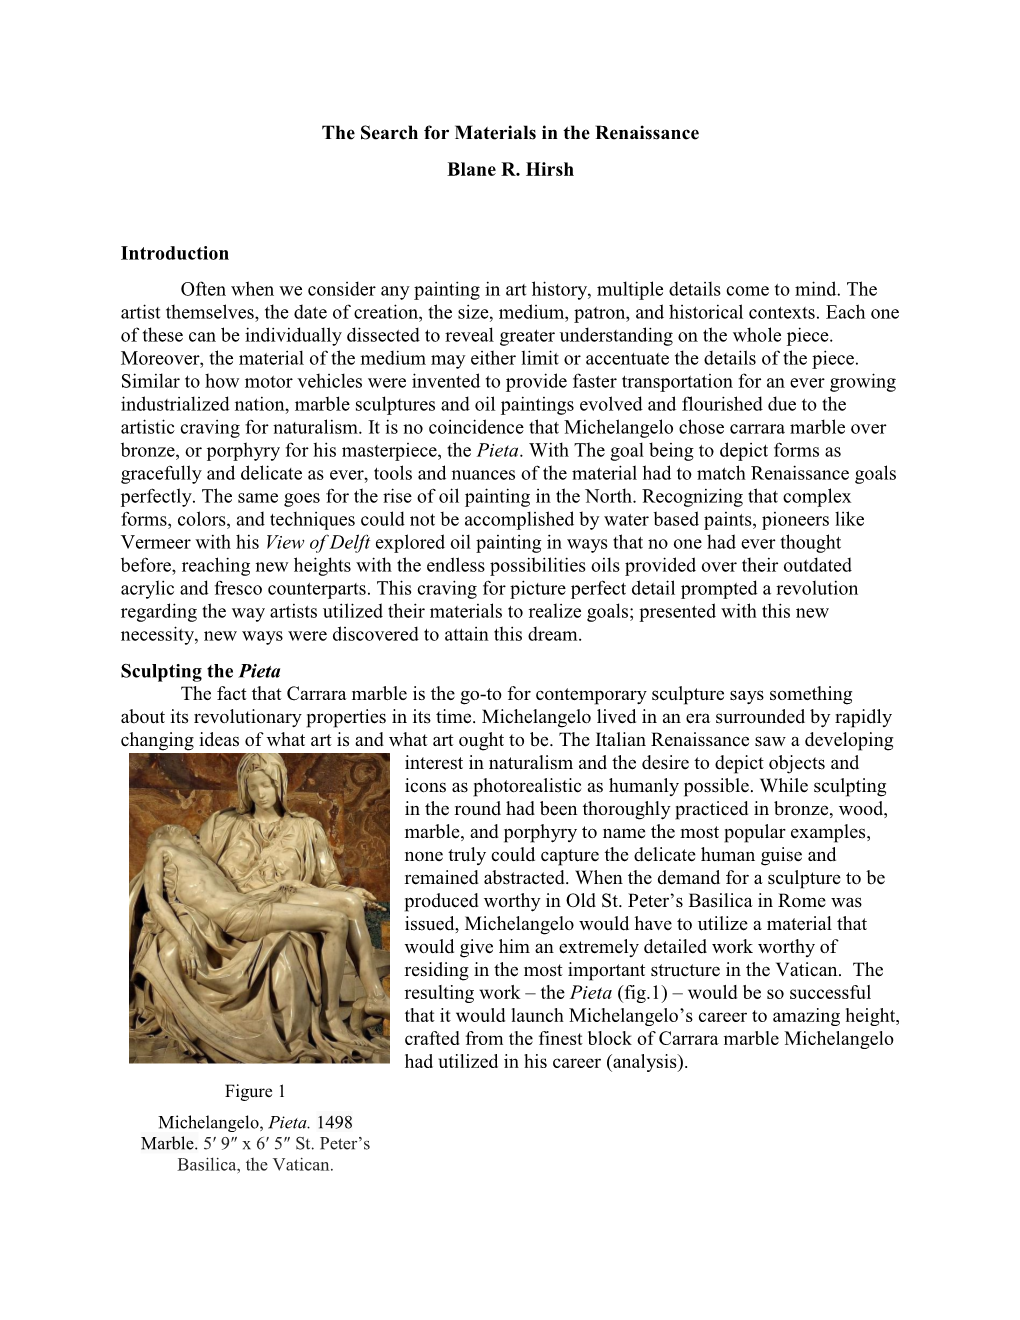 The Search for Materials in the Renaissance Blane R. Hirsh